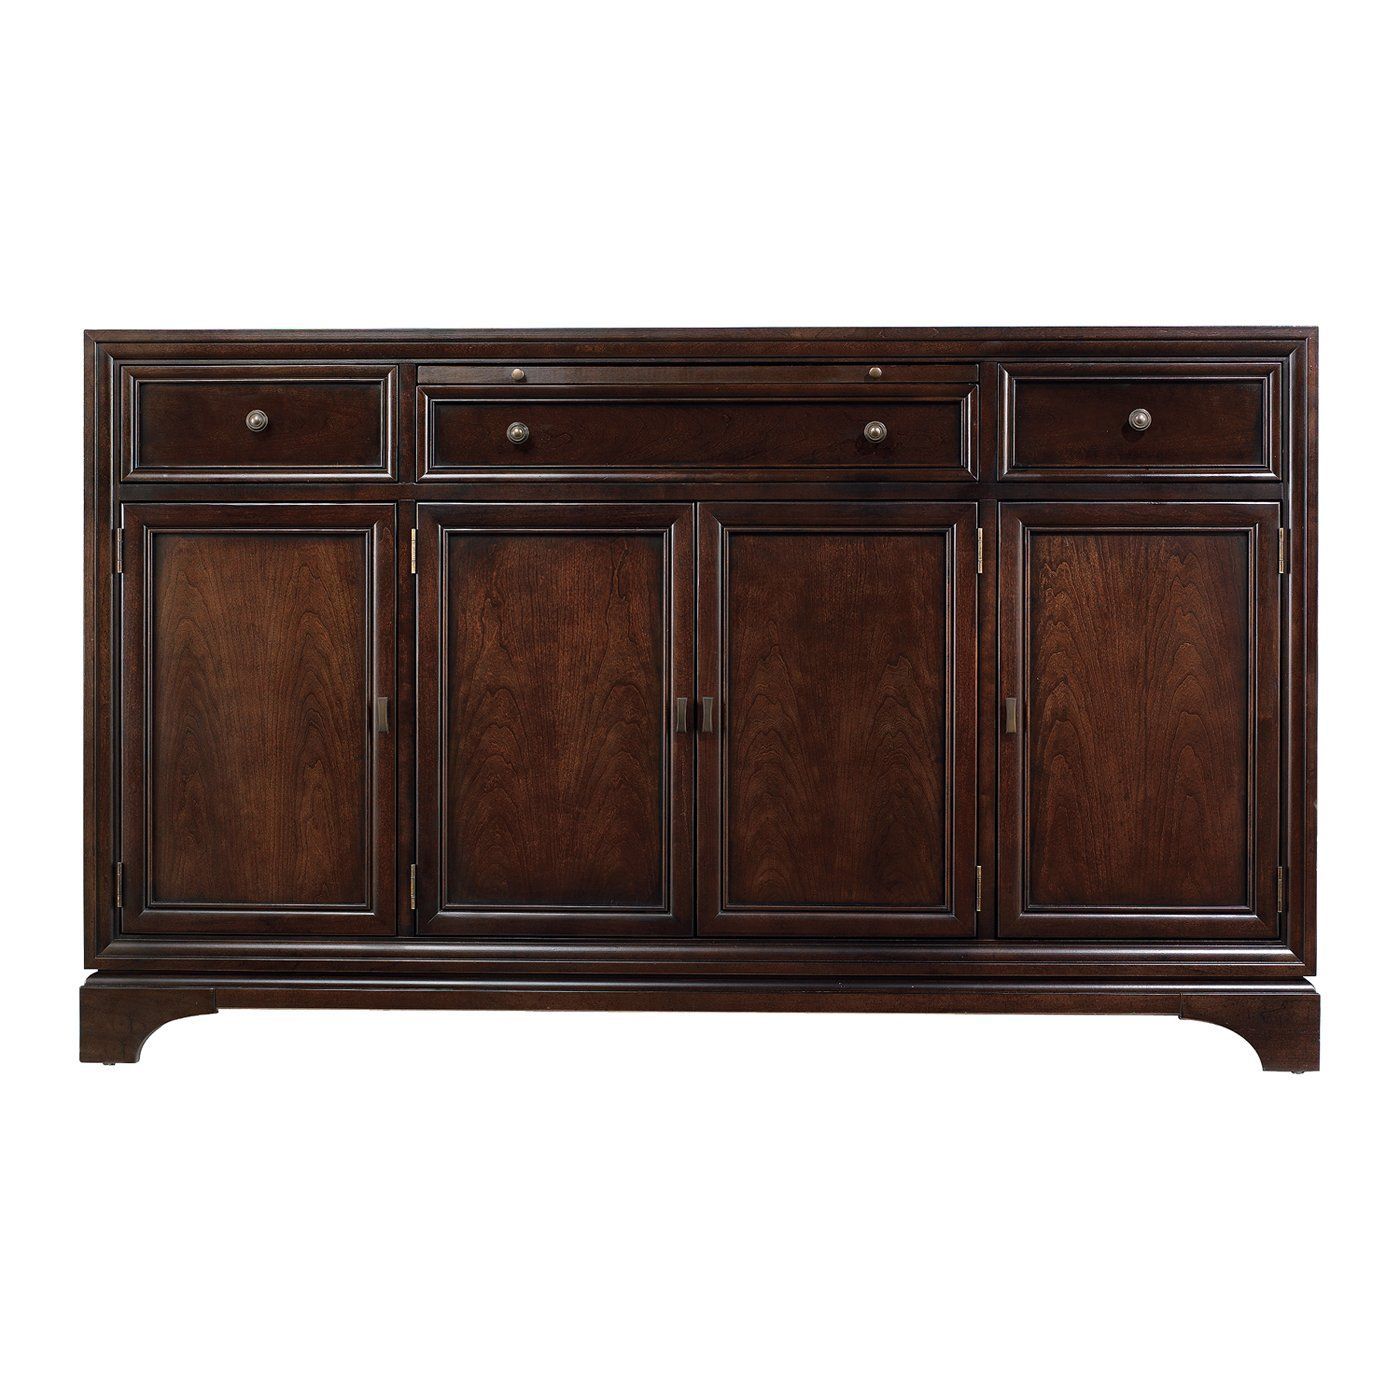 Stanley Furniture 816 61 07 Continuum Buffet Sideboard In 2018 Haroun Mocha Sideboards (View 18 of 20)